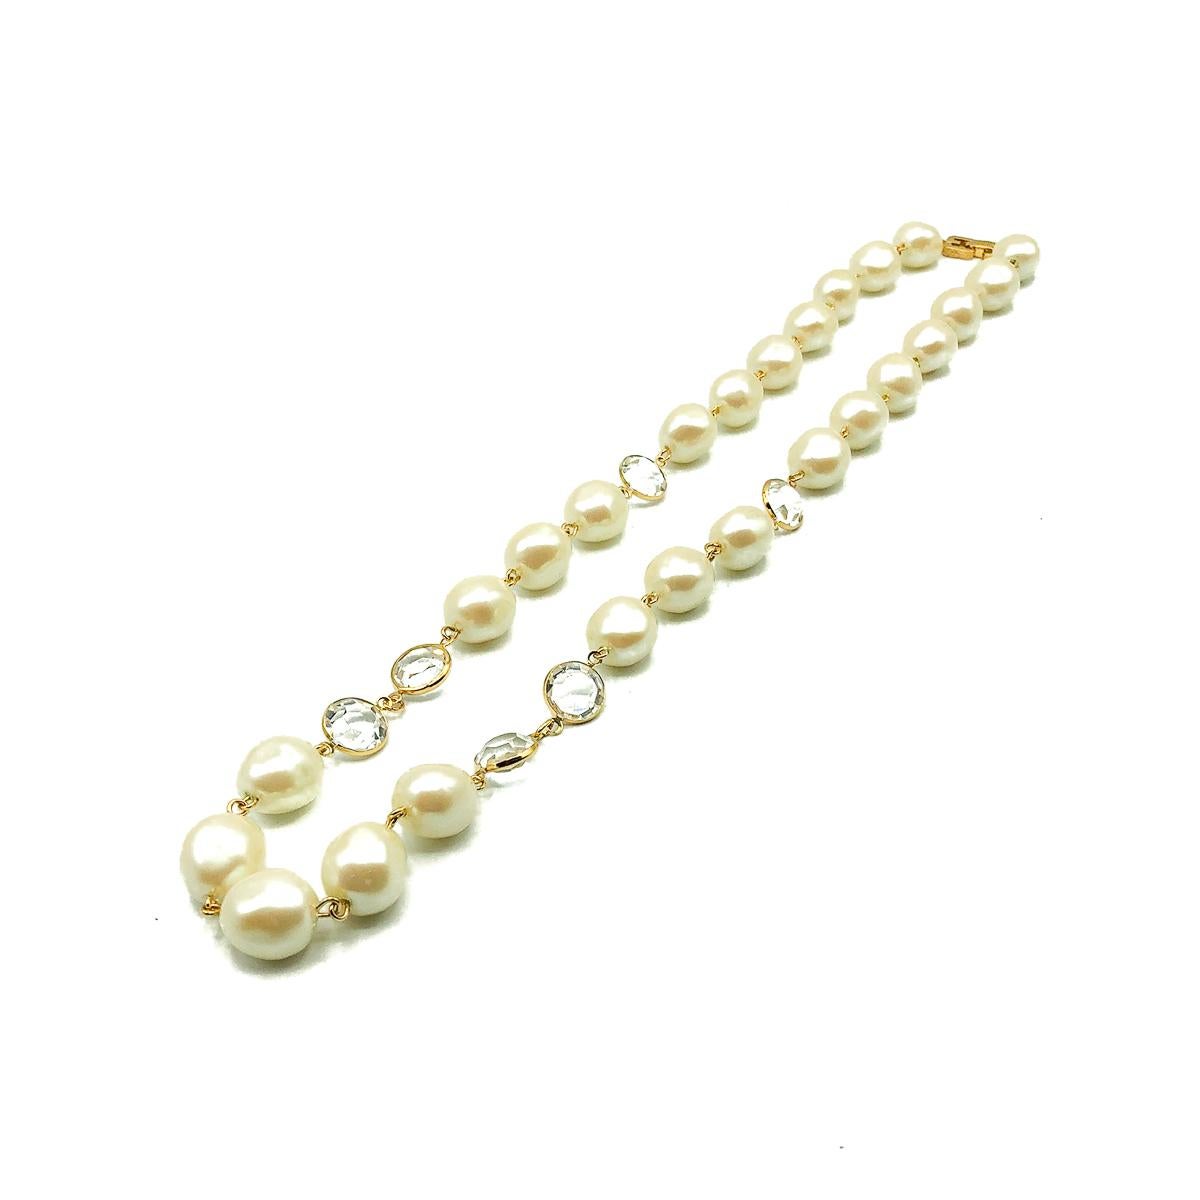 A Vintage Givenchy Pearl Necklace. Featuring a matinee length rope of glass faux pearls interspersed with mounted Swarovski crystals and finished with a double G logo clasp. Gold plated metal. 61cms. In very good vintage condition. Signed. With